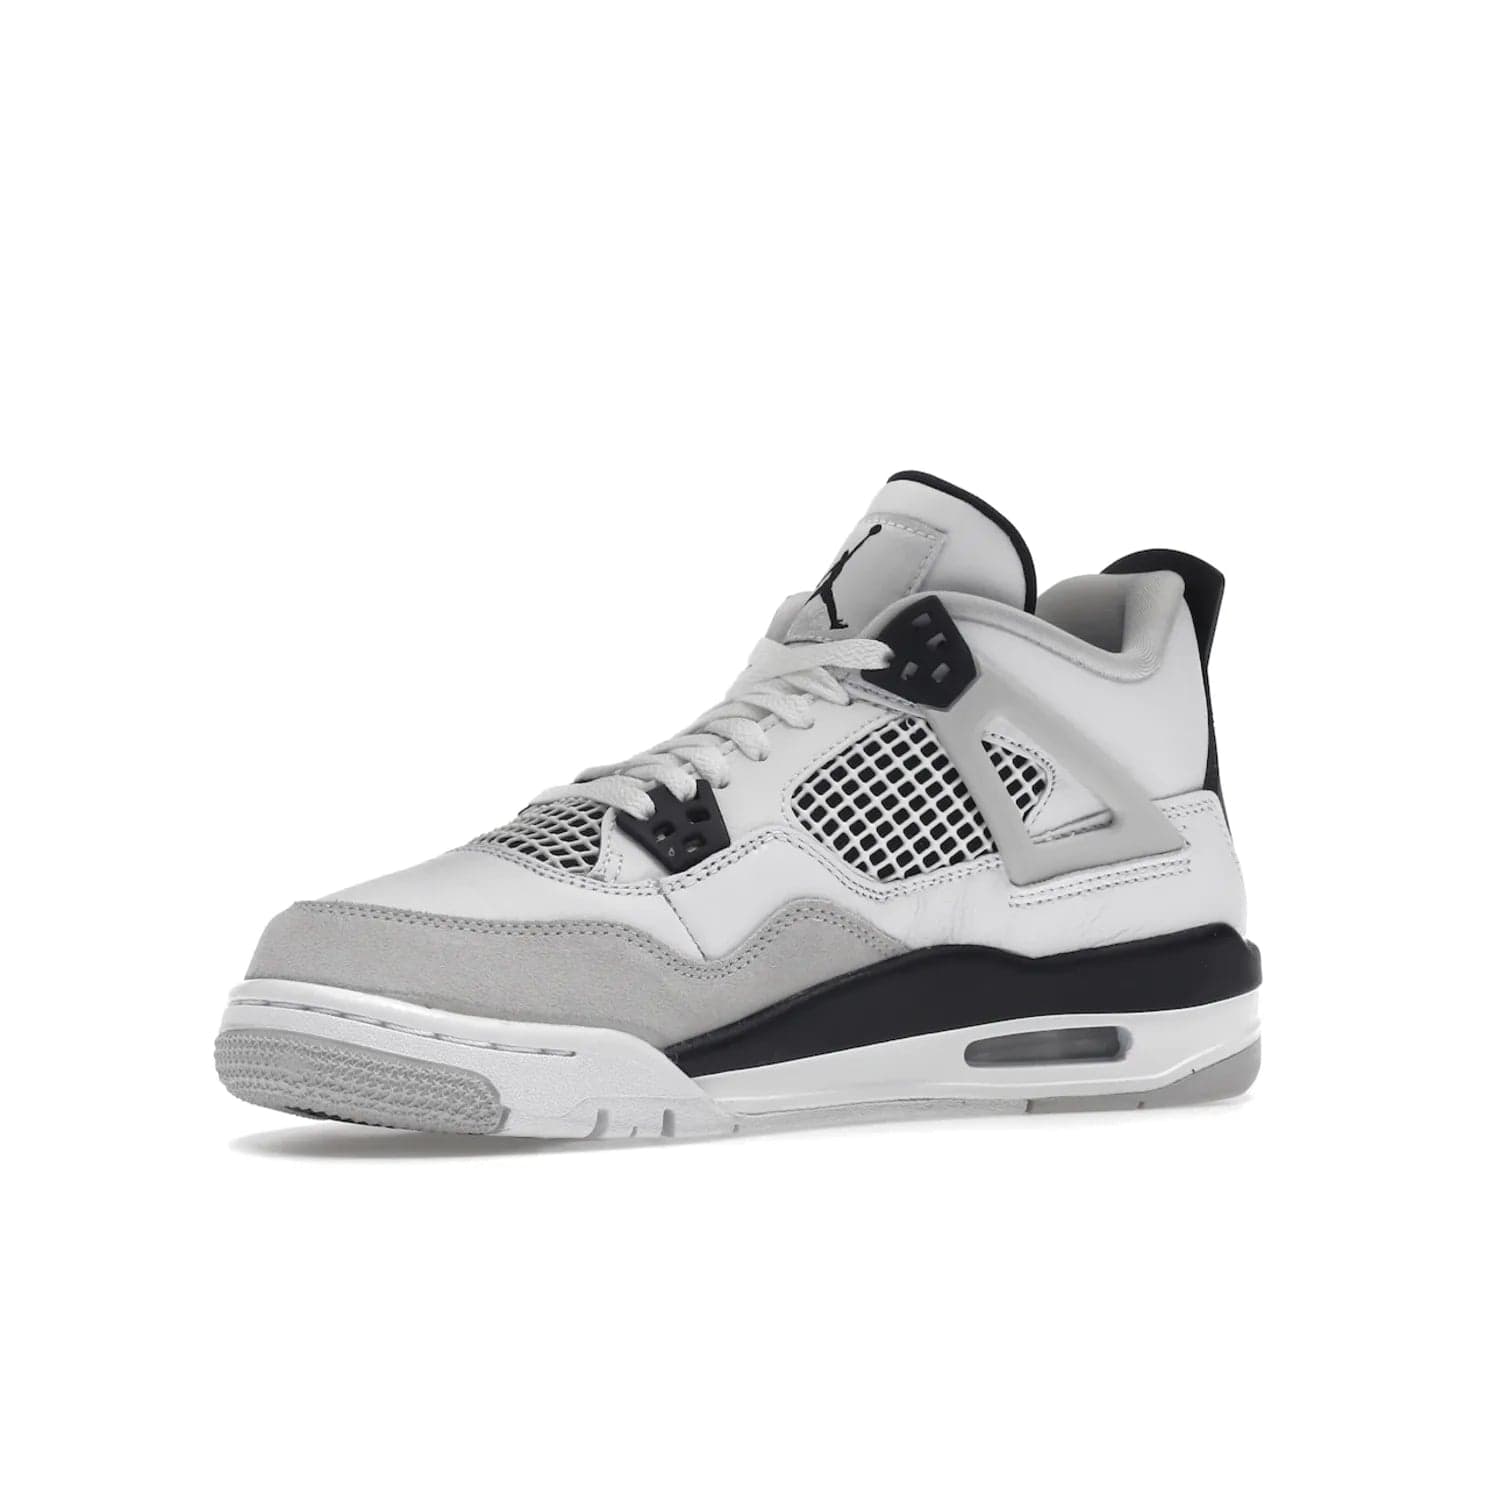 Jordan 4 Retro Military Black (GS) - Image 16 - Only at www.BallersClubKickz.com - A must-have for grade schoolers, the Air Jordan 4 Retro Military Black (GS) offers classic style with plenty of breathable support. Featuring a white sole and base with suede and leather overlays in subtle black and grey tones, the shoes are perfect for active pursuits and everyday comfort. Get an instant classic today!